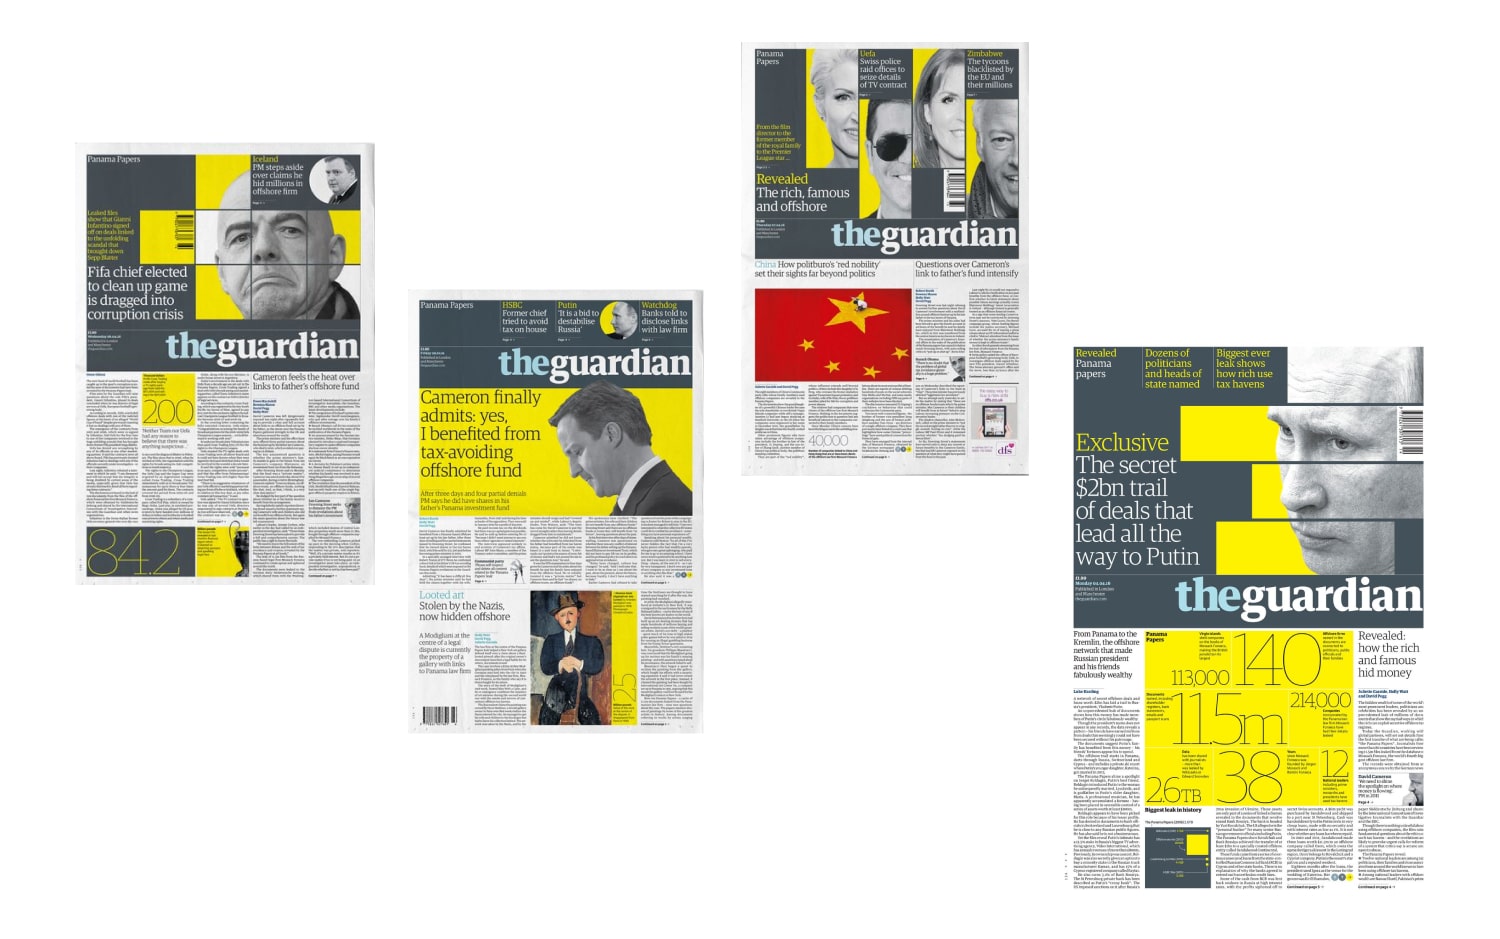 Some of the The Guardian design pages